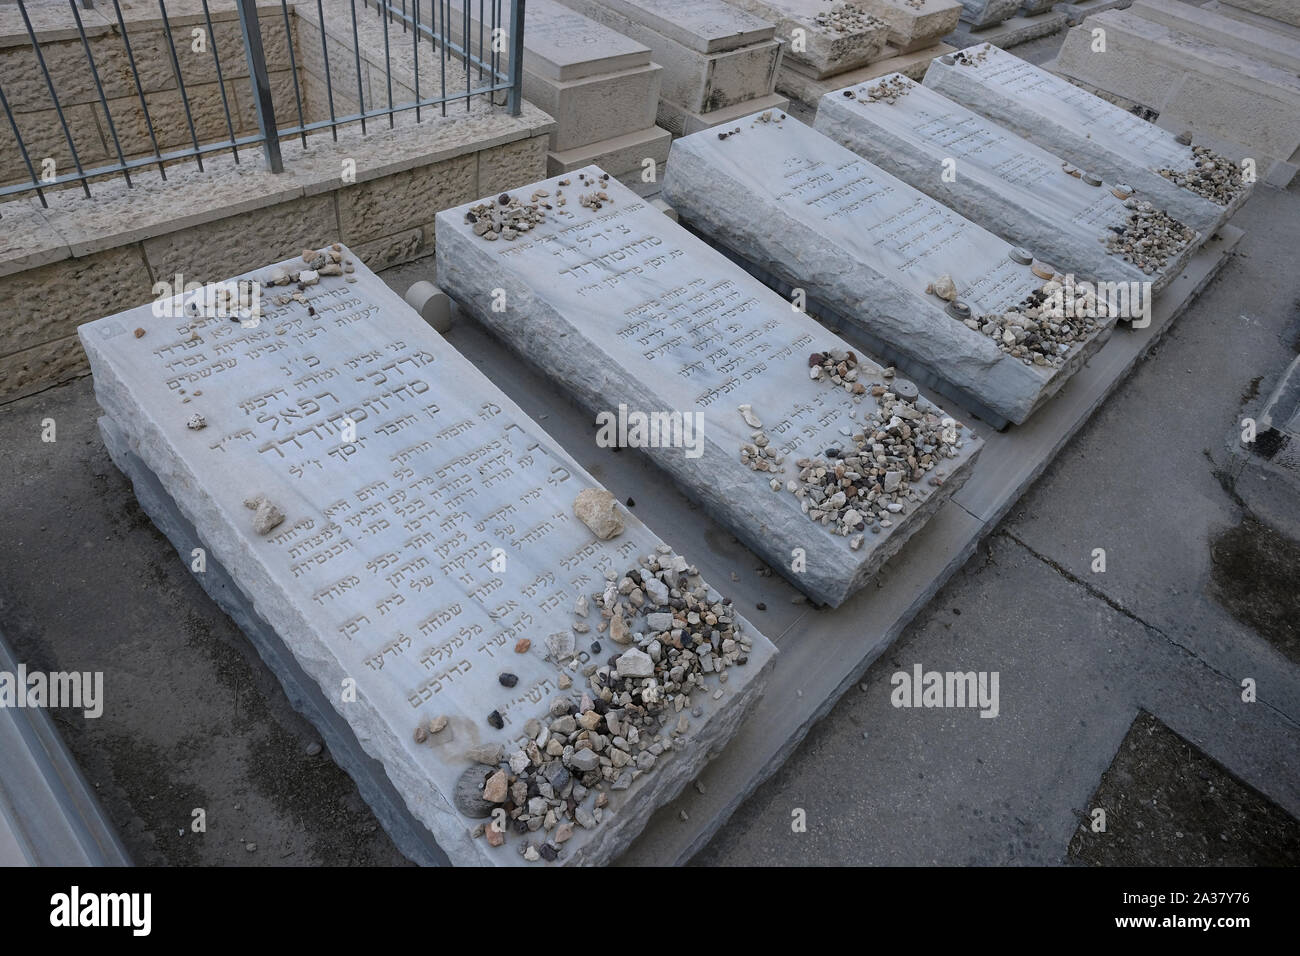 Stones placed in sign of gratitude by Jewish visitors according to Jewish tradition on top of the graves of five members of Schijveschuurder Dutch immigrant family killed in the Sbarro restaurant suicide bombing in central Jerusalem, also called the Sbarro massacre on 9 August 2001 in which 15 civilians were killed located in Har HaMenuchot also known as Givat Shaul Cemetery in West Jerusalem Israel Stock Photo